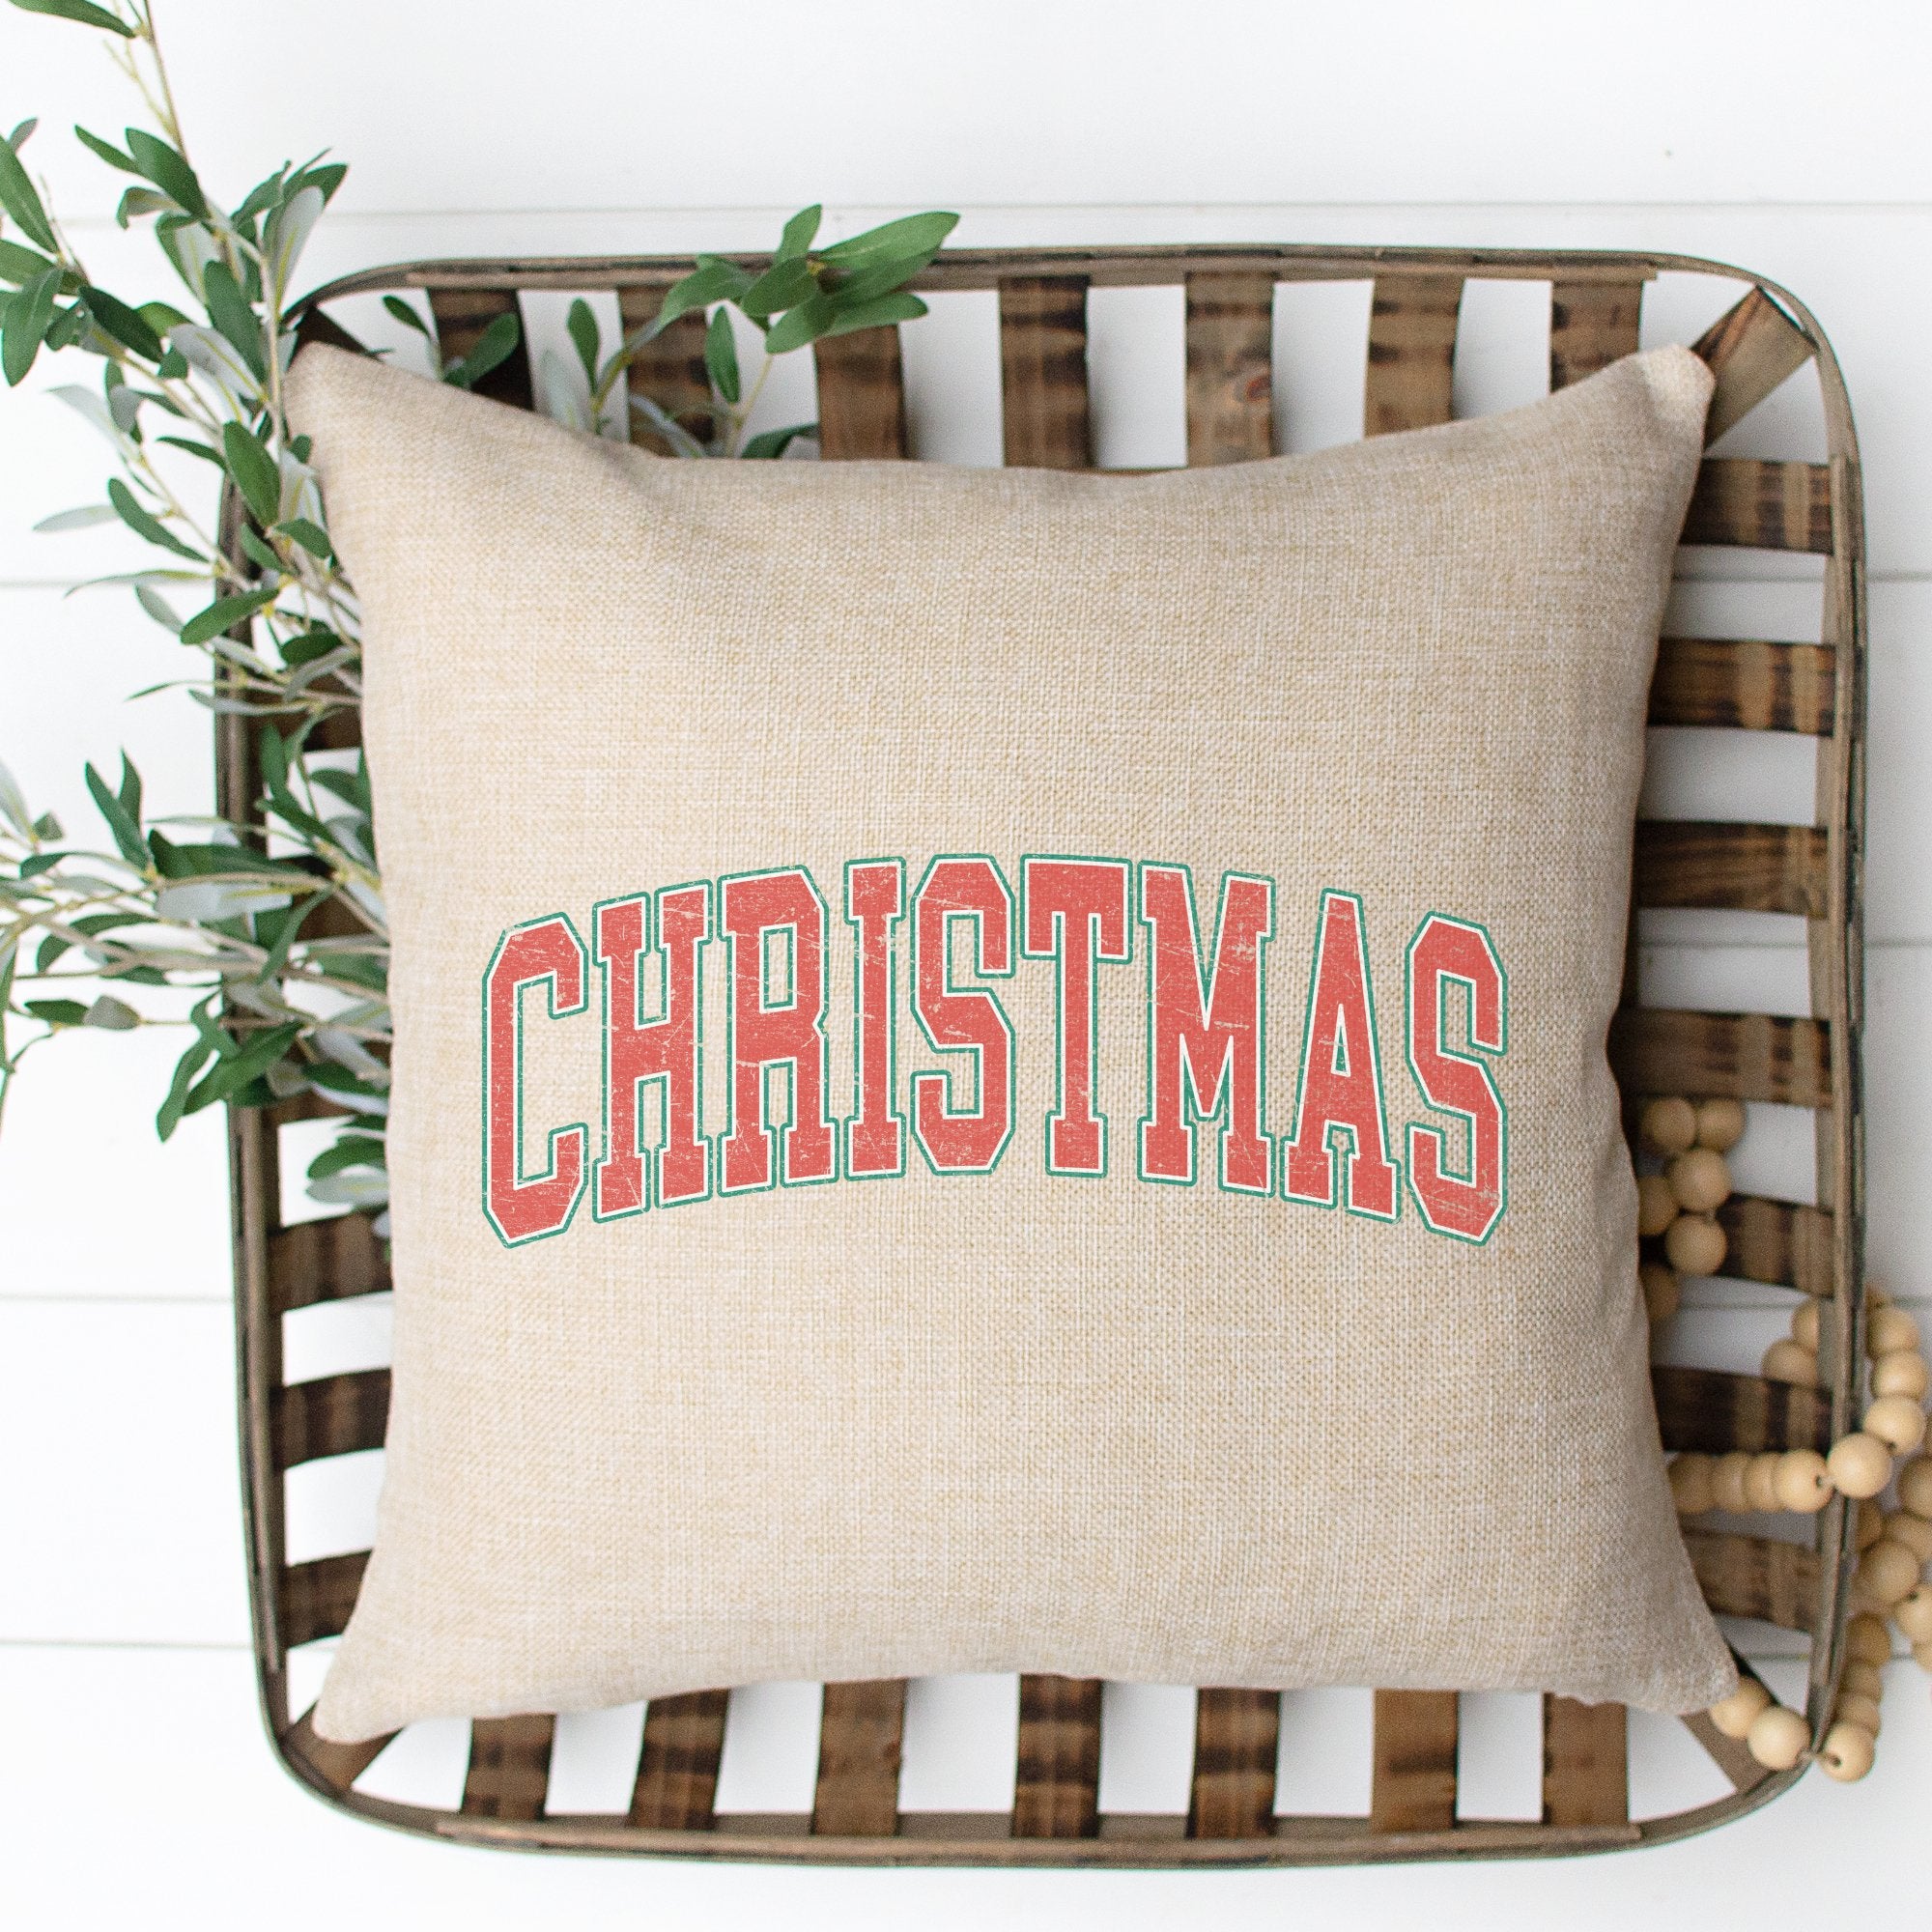 Varsity Christmas Pillow Cover - Trendznmore